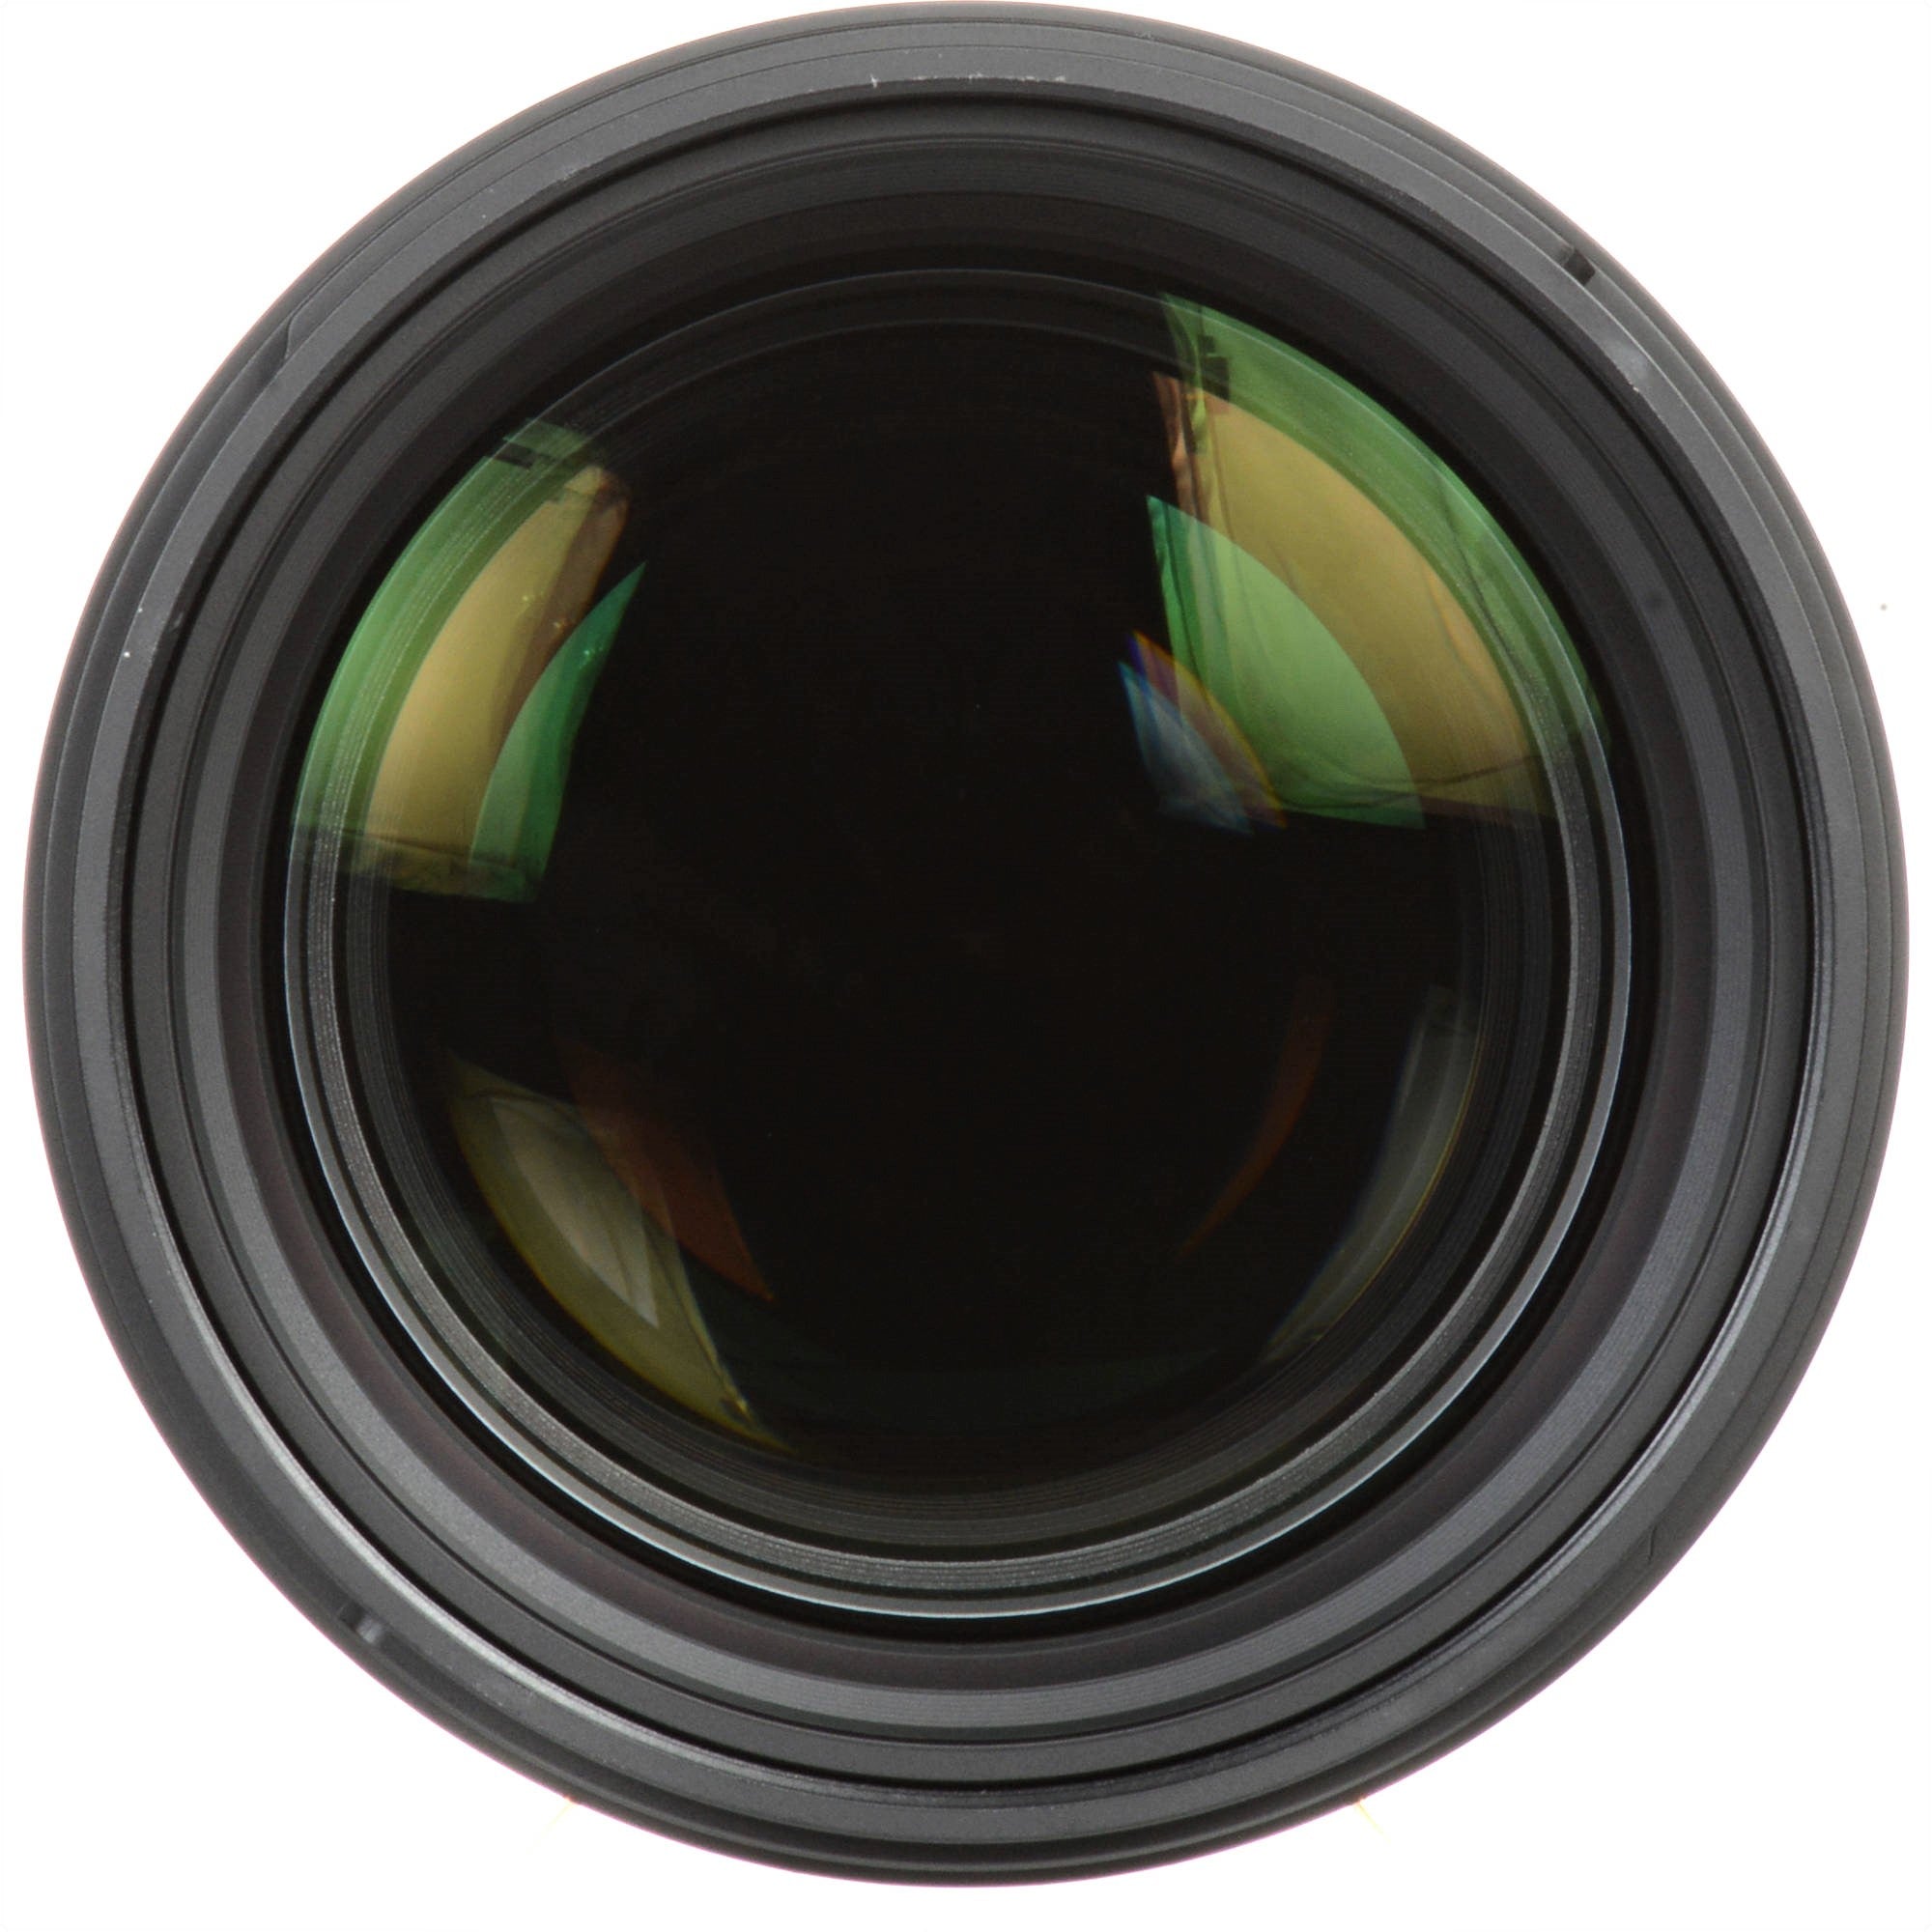 Sigma 85mm F1.4 DG HSM Art Lens for Canon EF in a Front Close-Up View